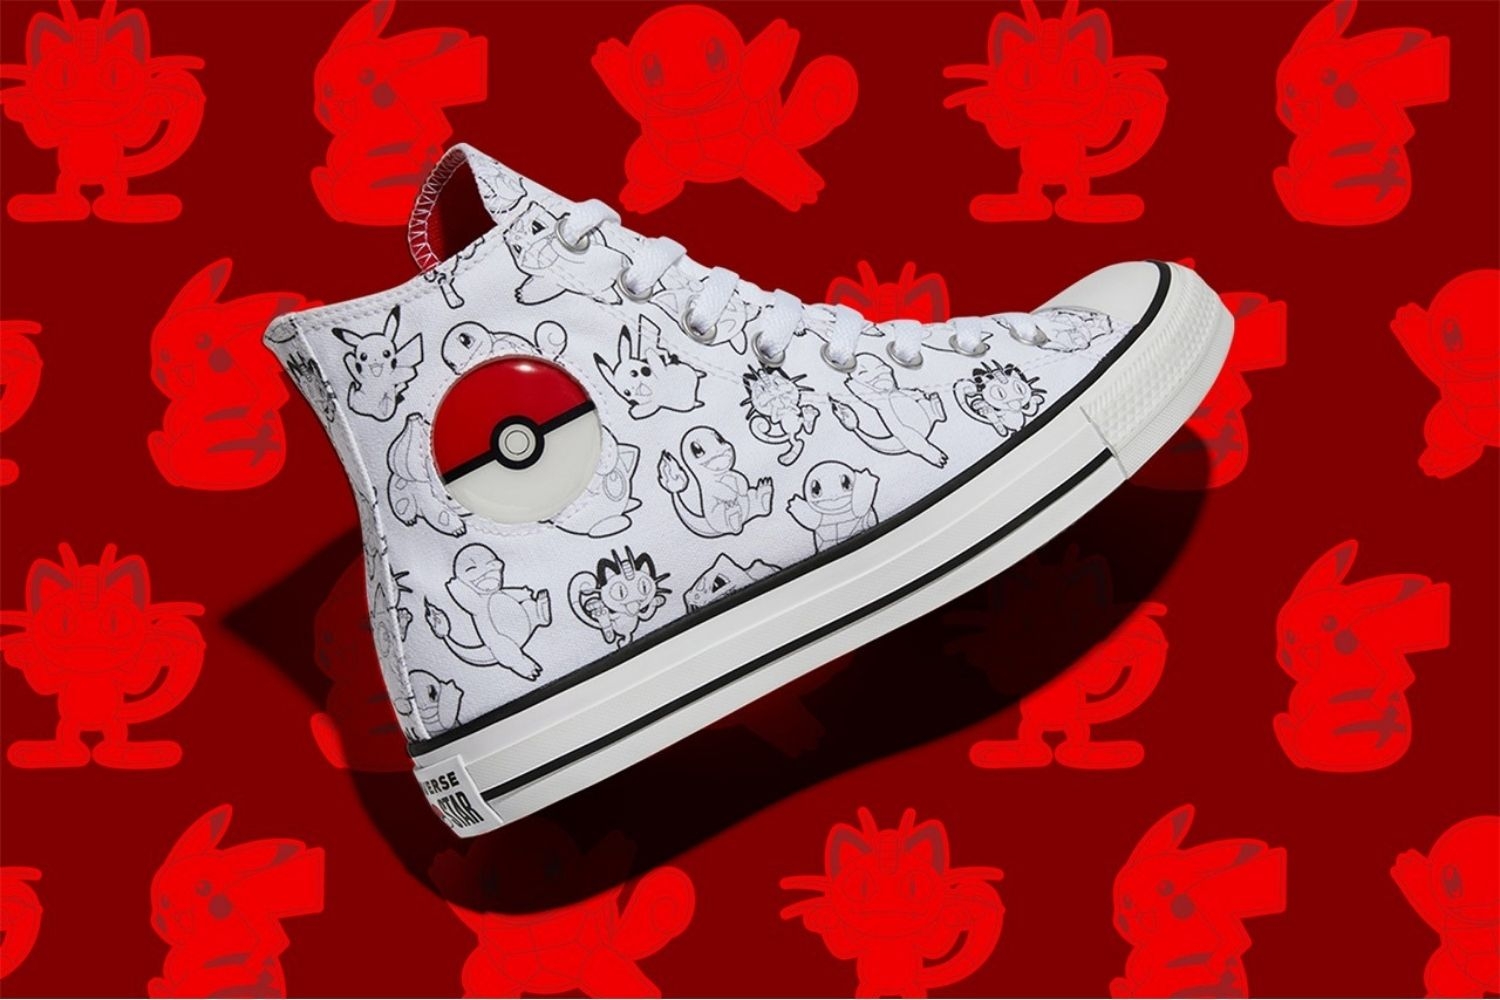 Converse releases a special collection with Pokémon